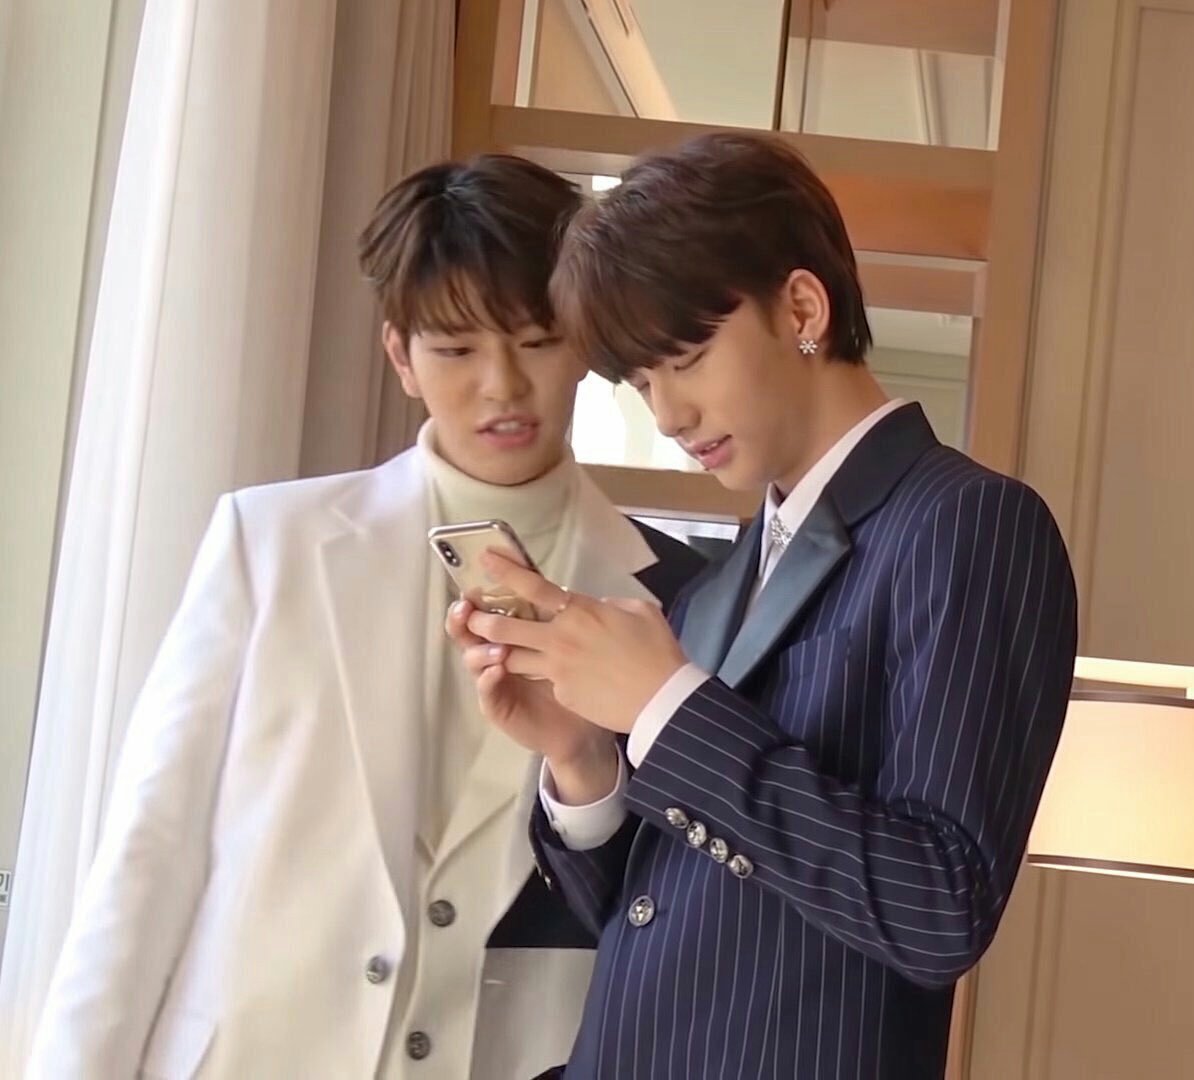 seungjin pics i have on my gallery— a thread